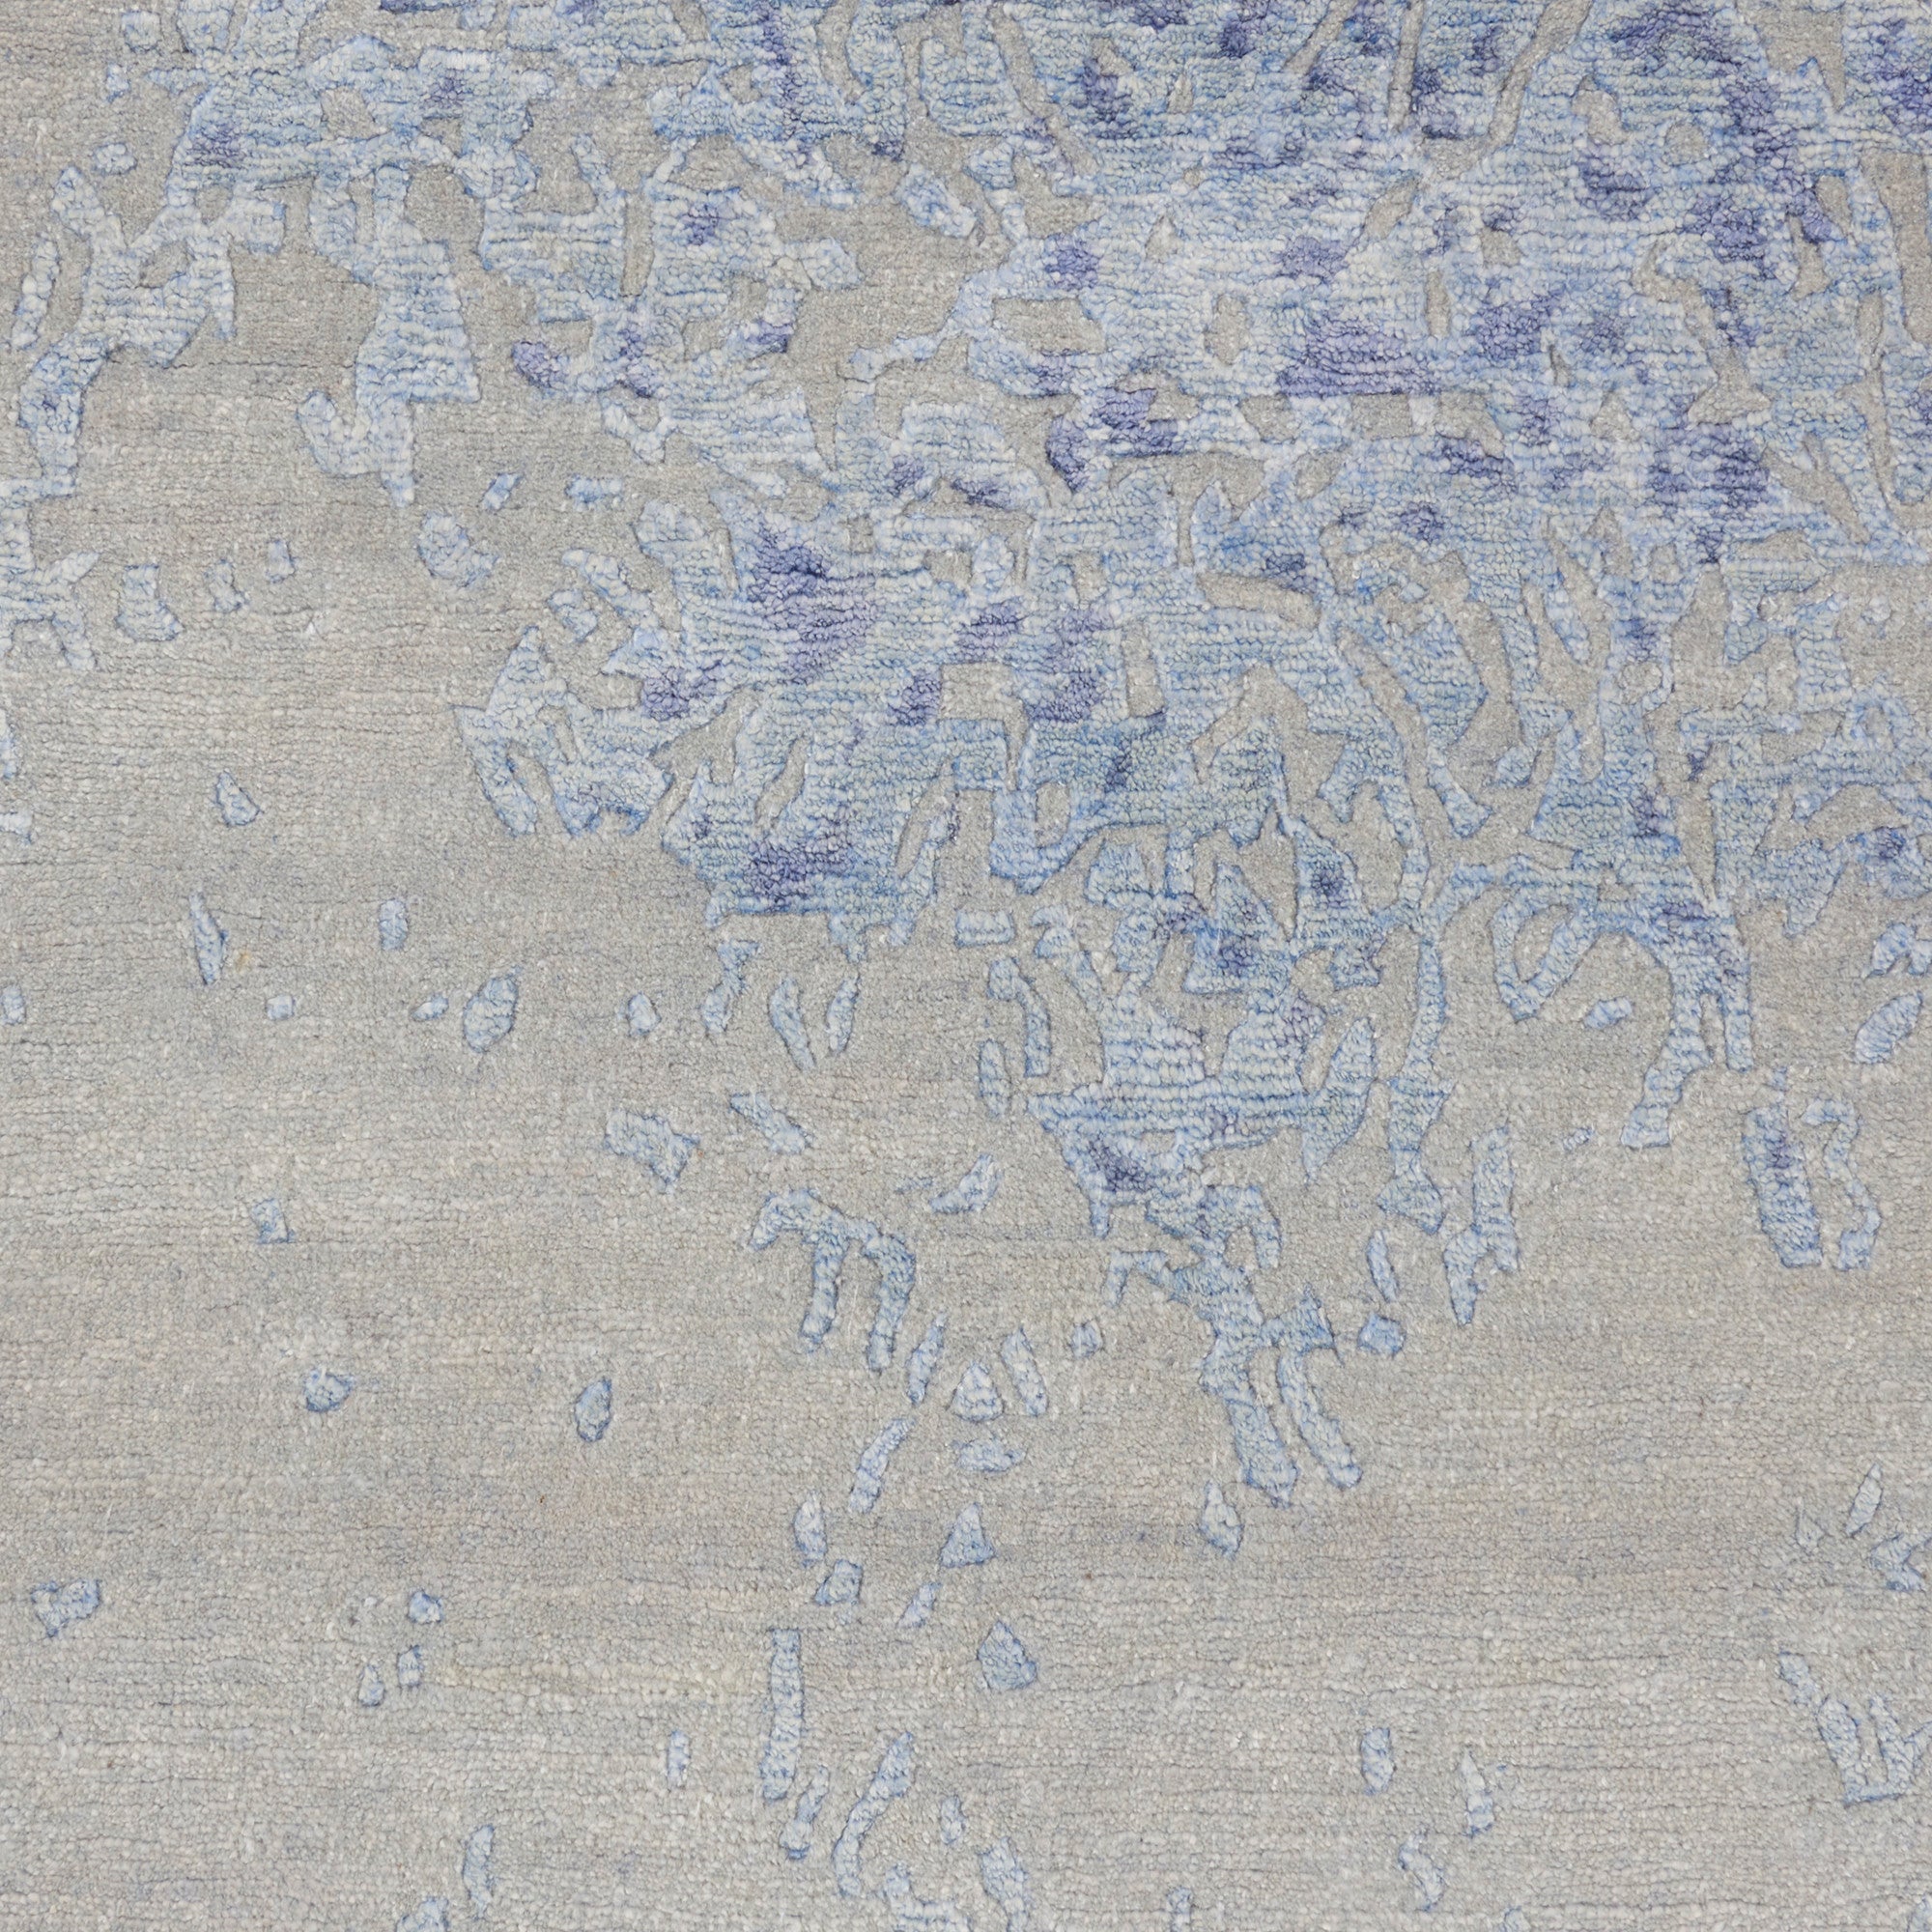 Close-up of beige denim fabric with faded blue speckles and streaks.